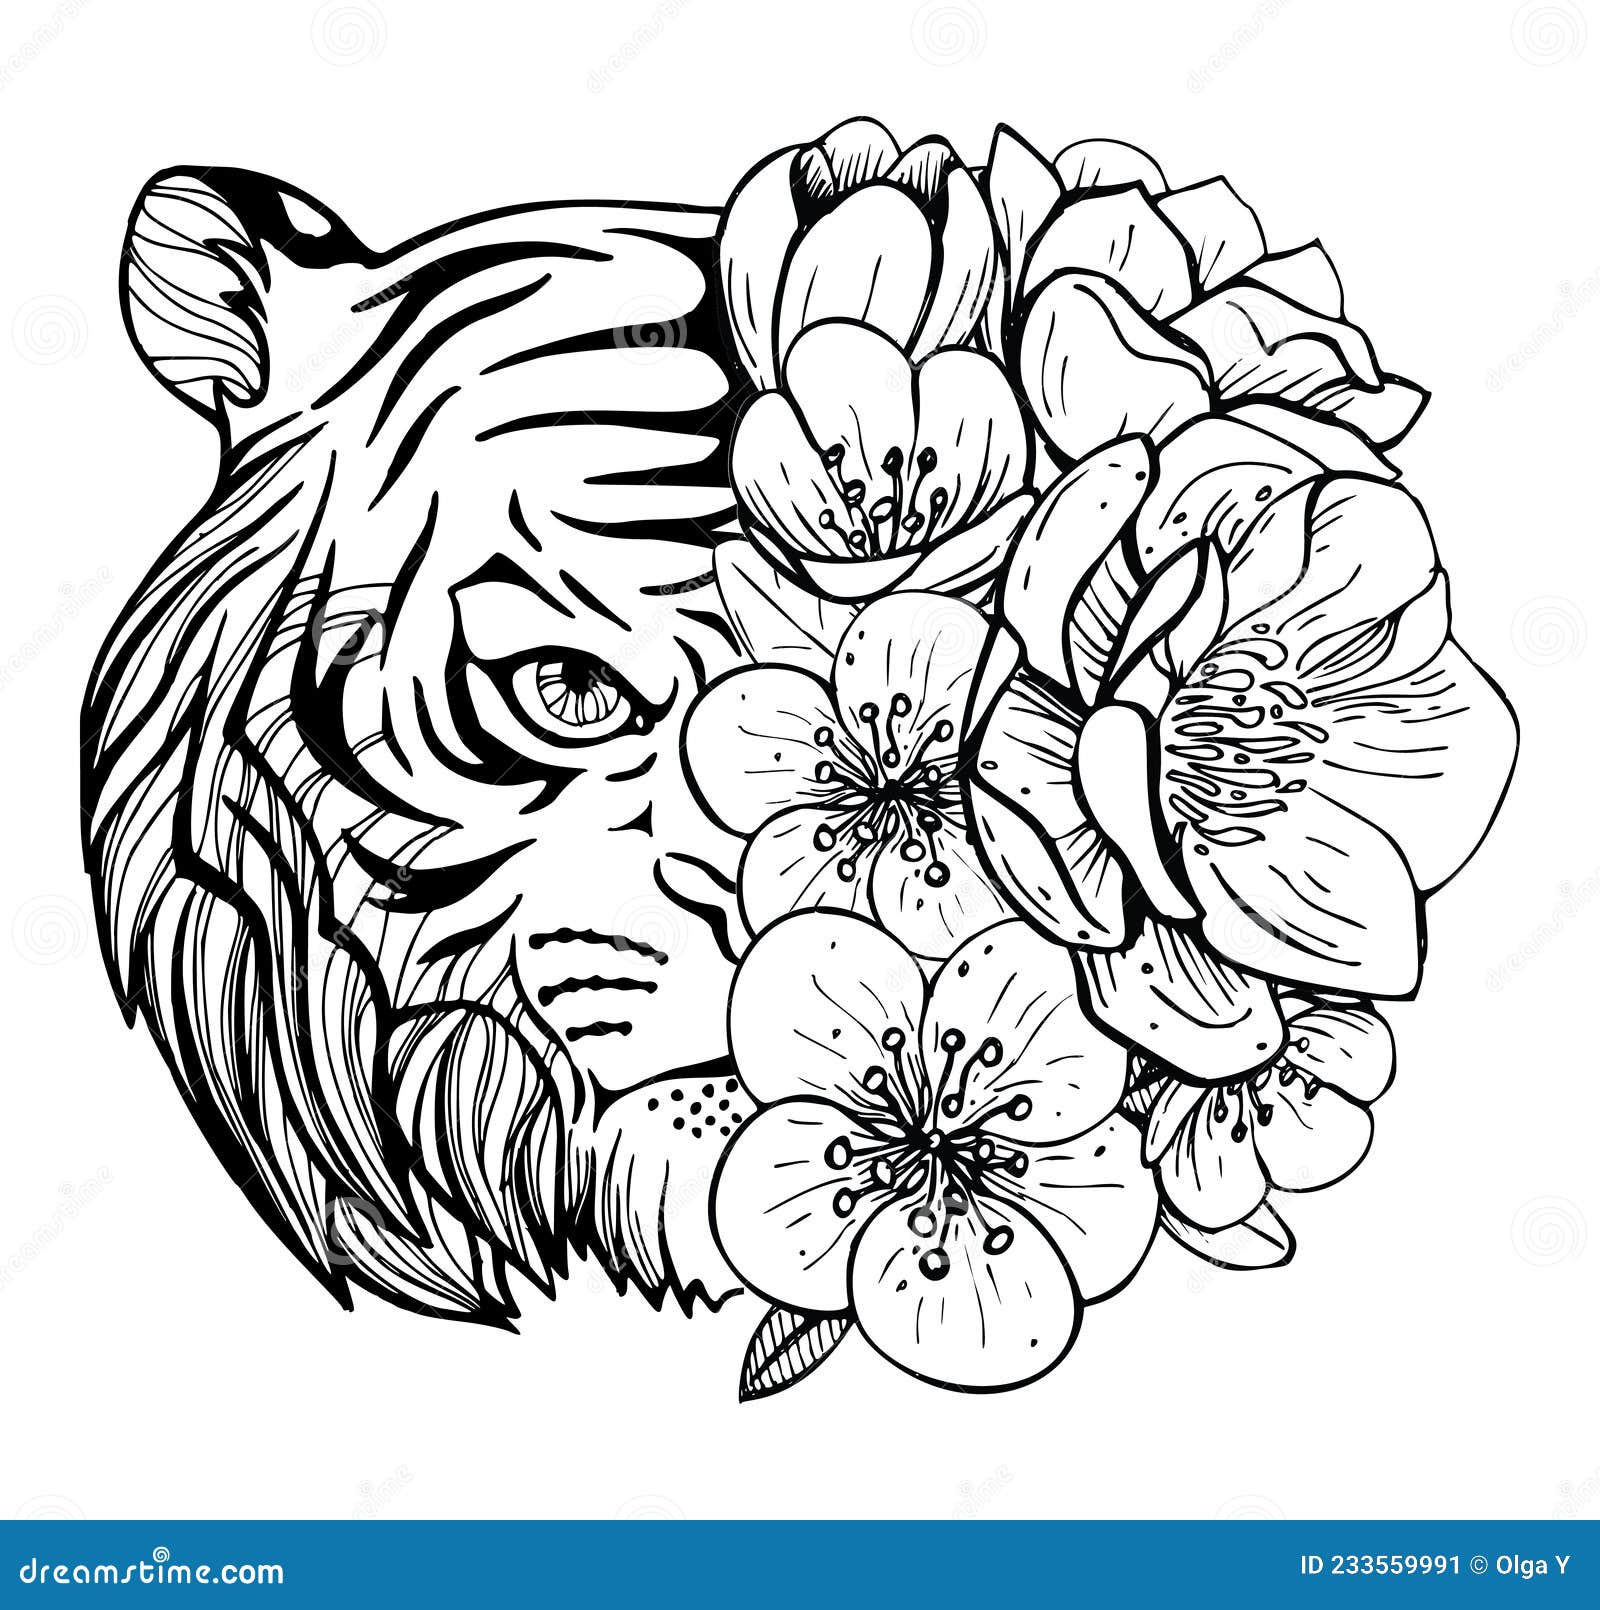 Colouring Pictures with a Tiger and Flower. Art Therapy Coloring Page for  Adults and Children. Stock Image - Image of design, beautiful: 233559991